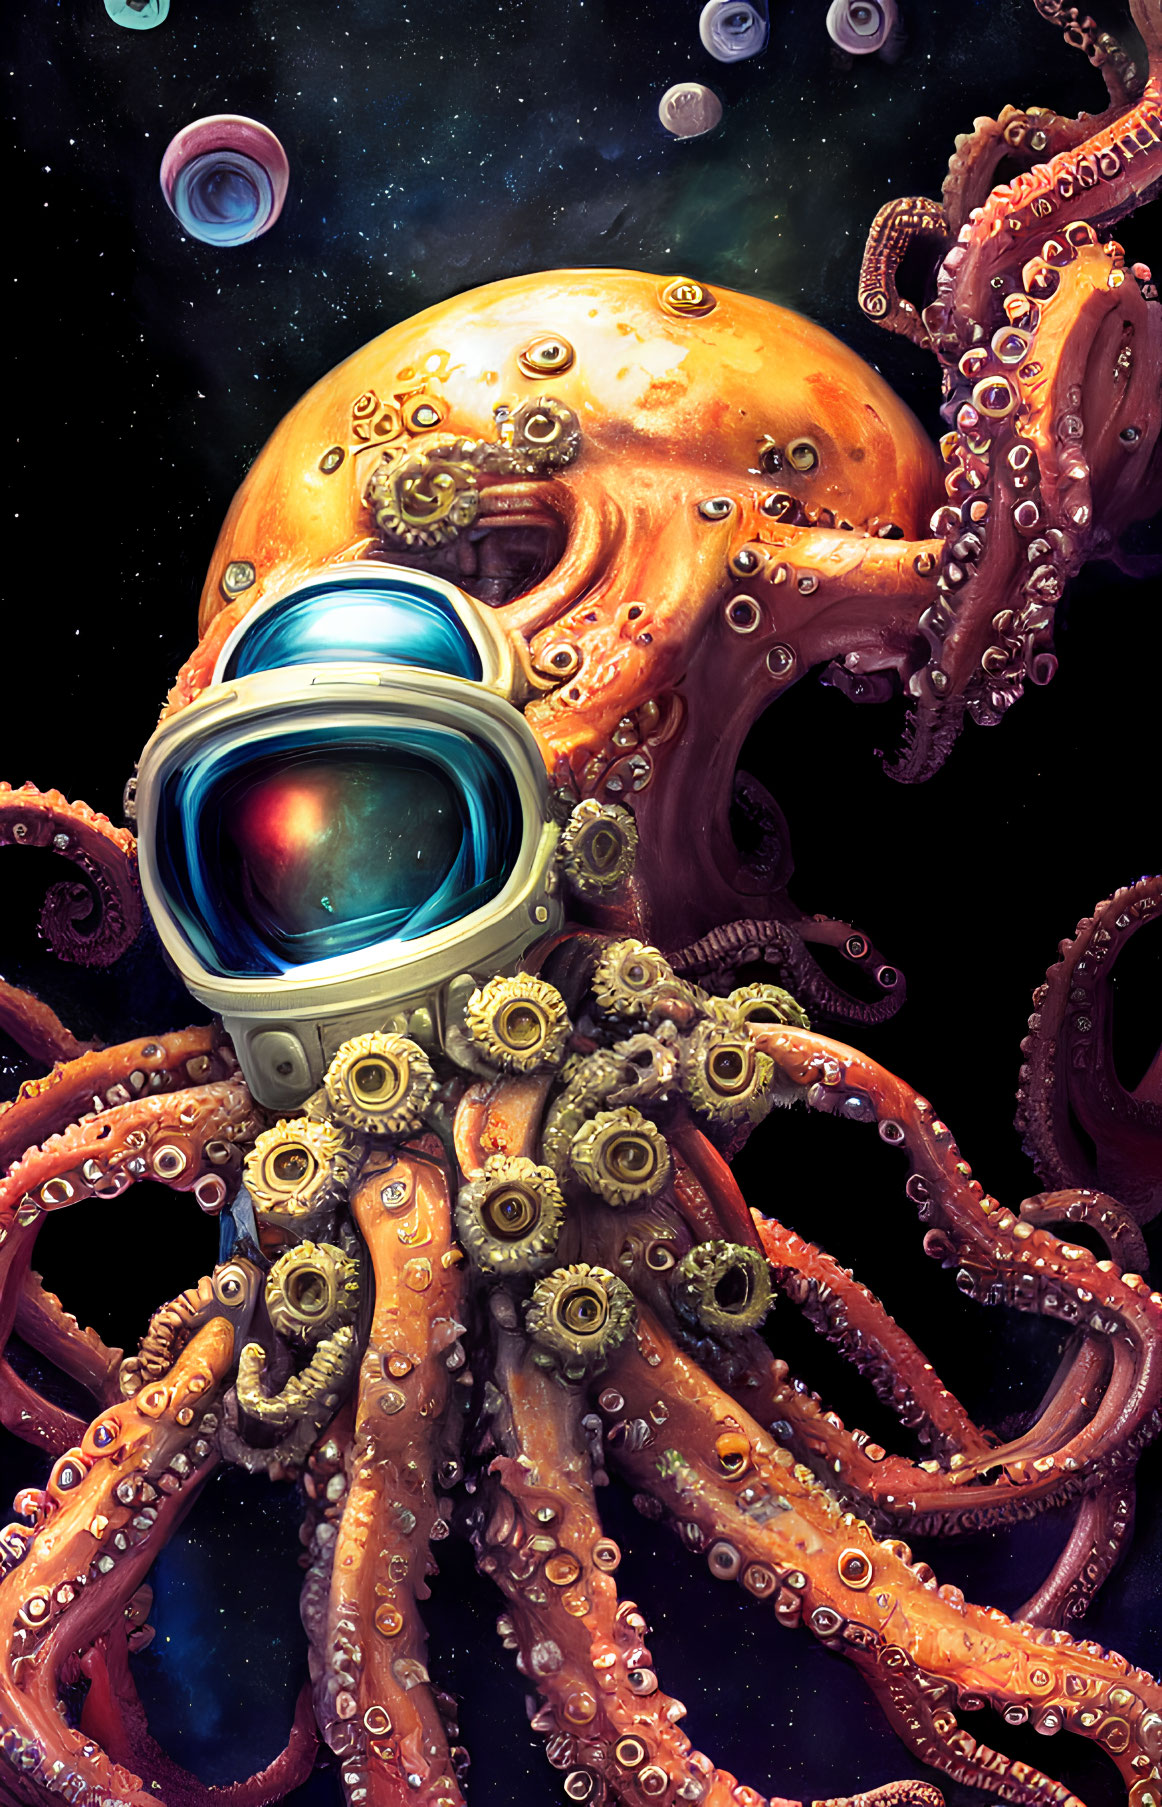 Octopus in astronaut helmet with tentacles and planets in space